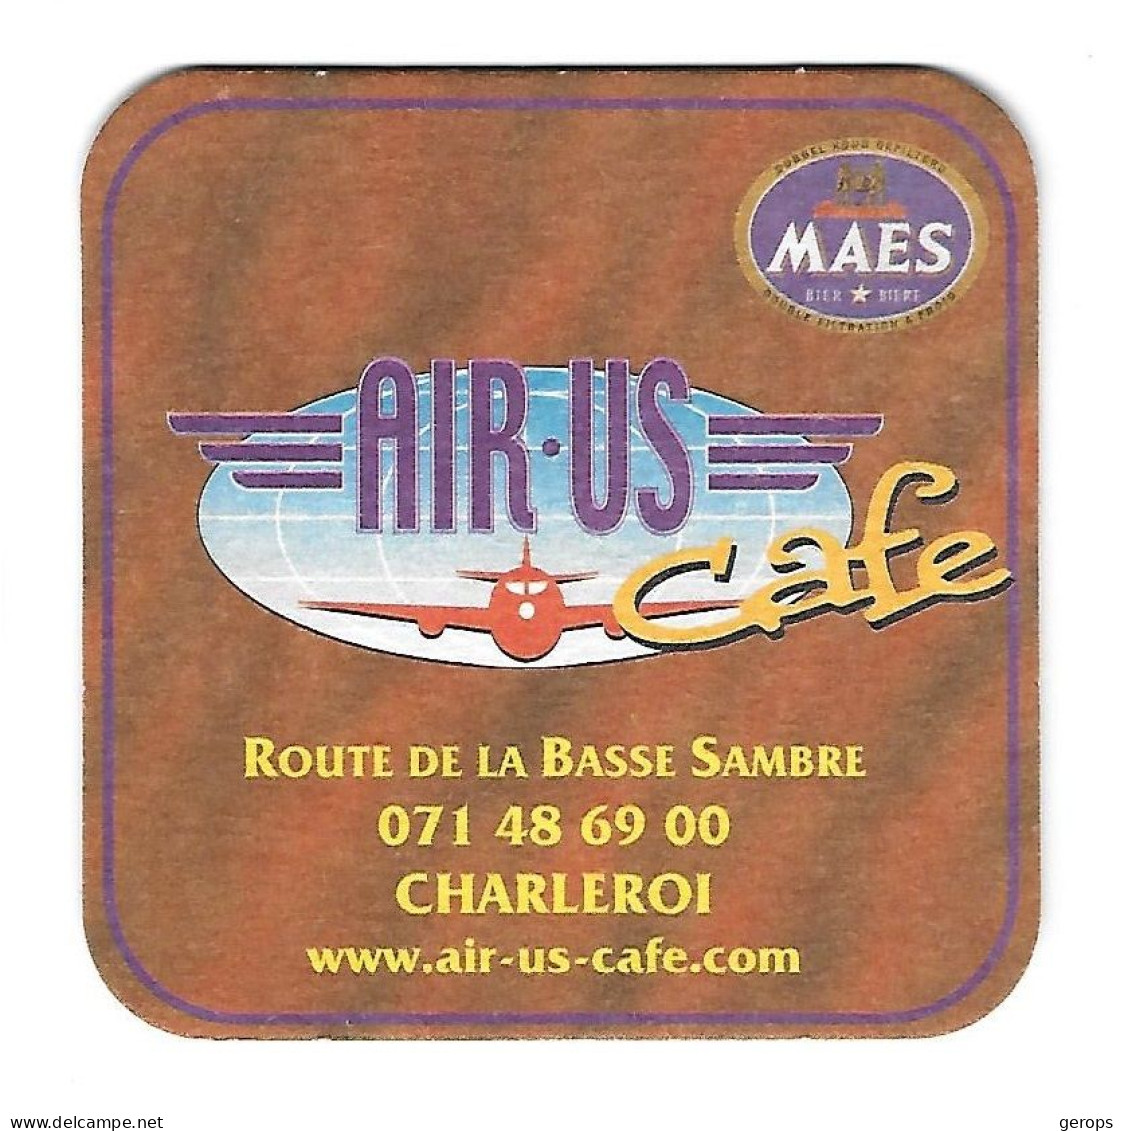 140a Brij. Maes Waarloos Air-Bus Cafe Charleroi - Sotto-boccale